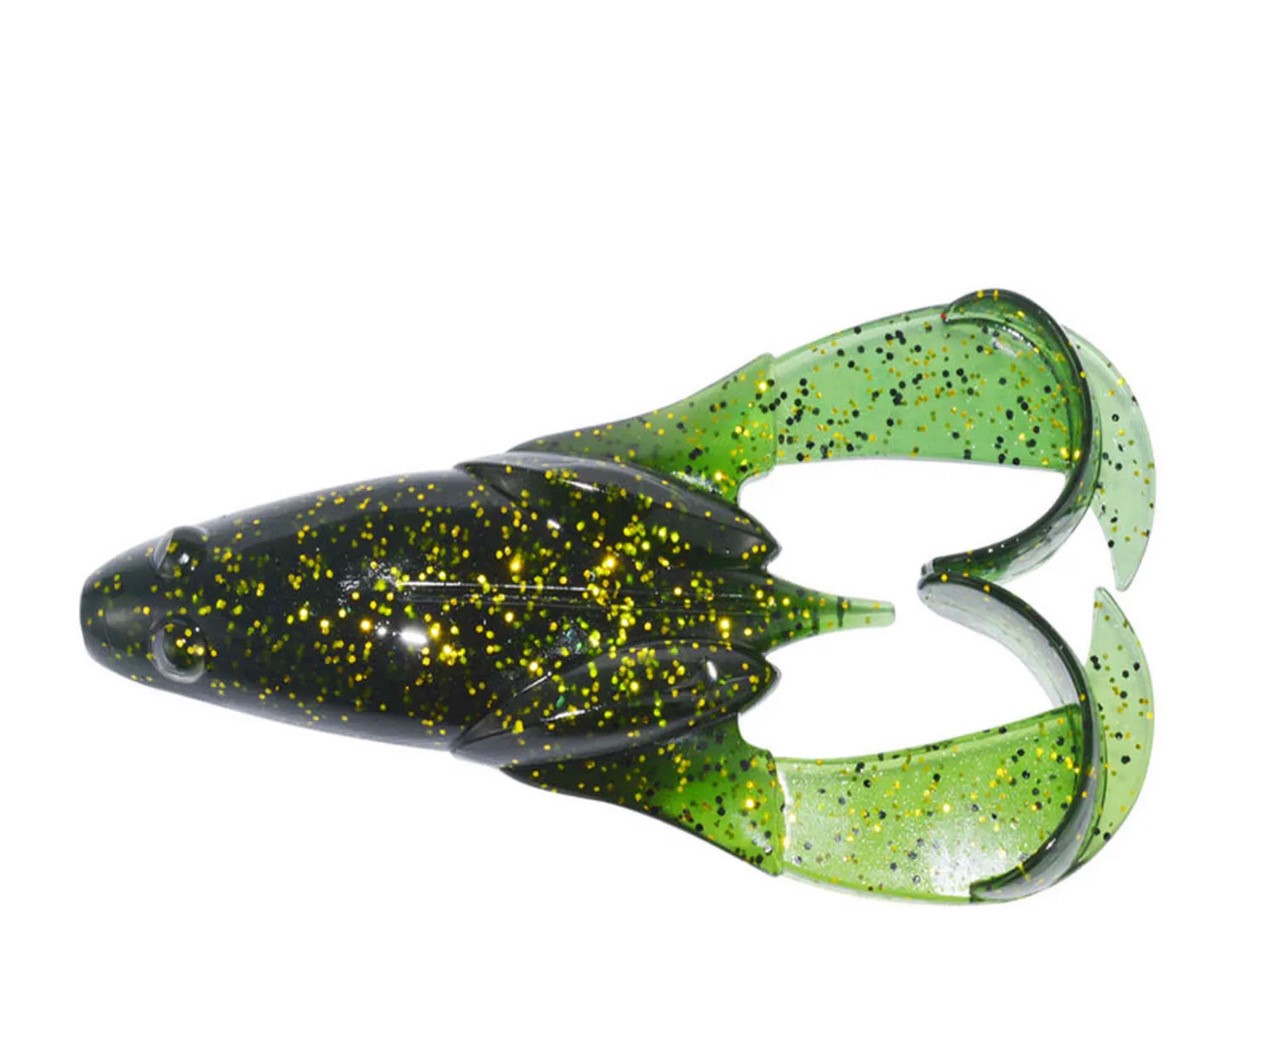 4 INCH NIGHT CRAWLER GREEN AND GOLD FROG